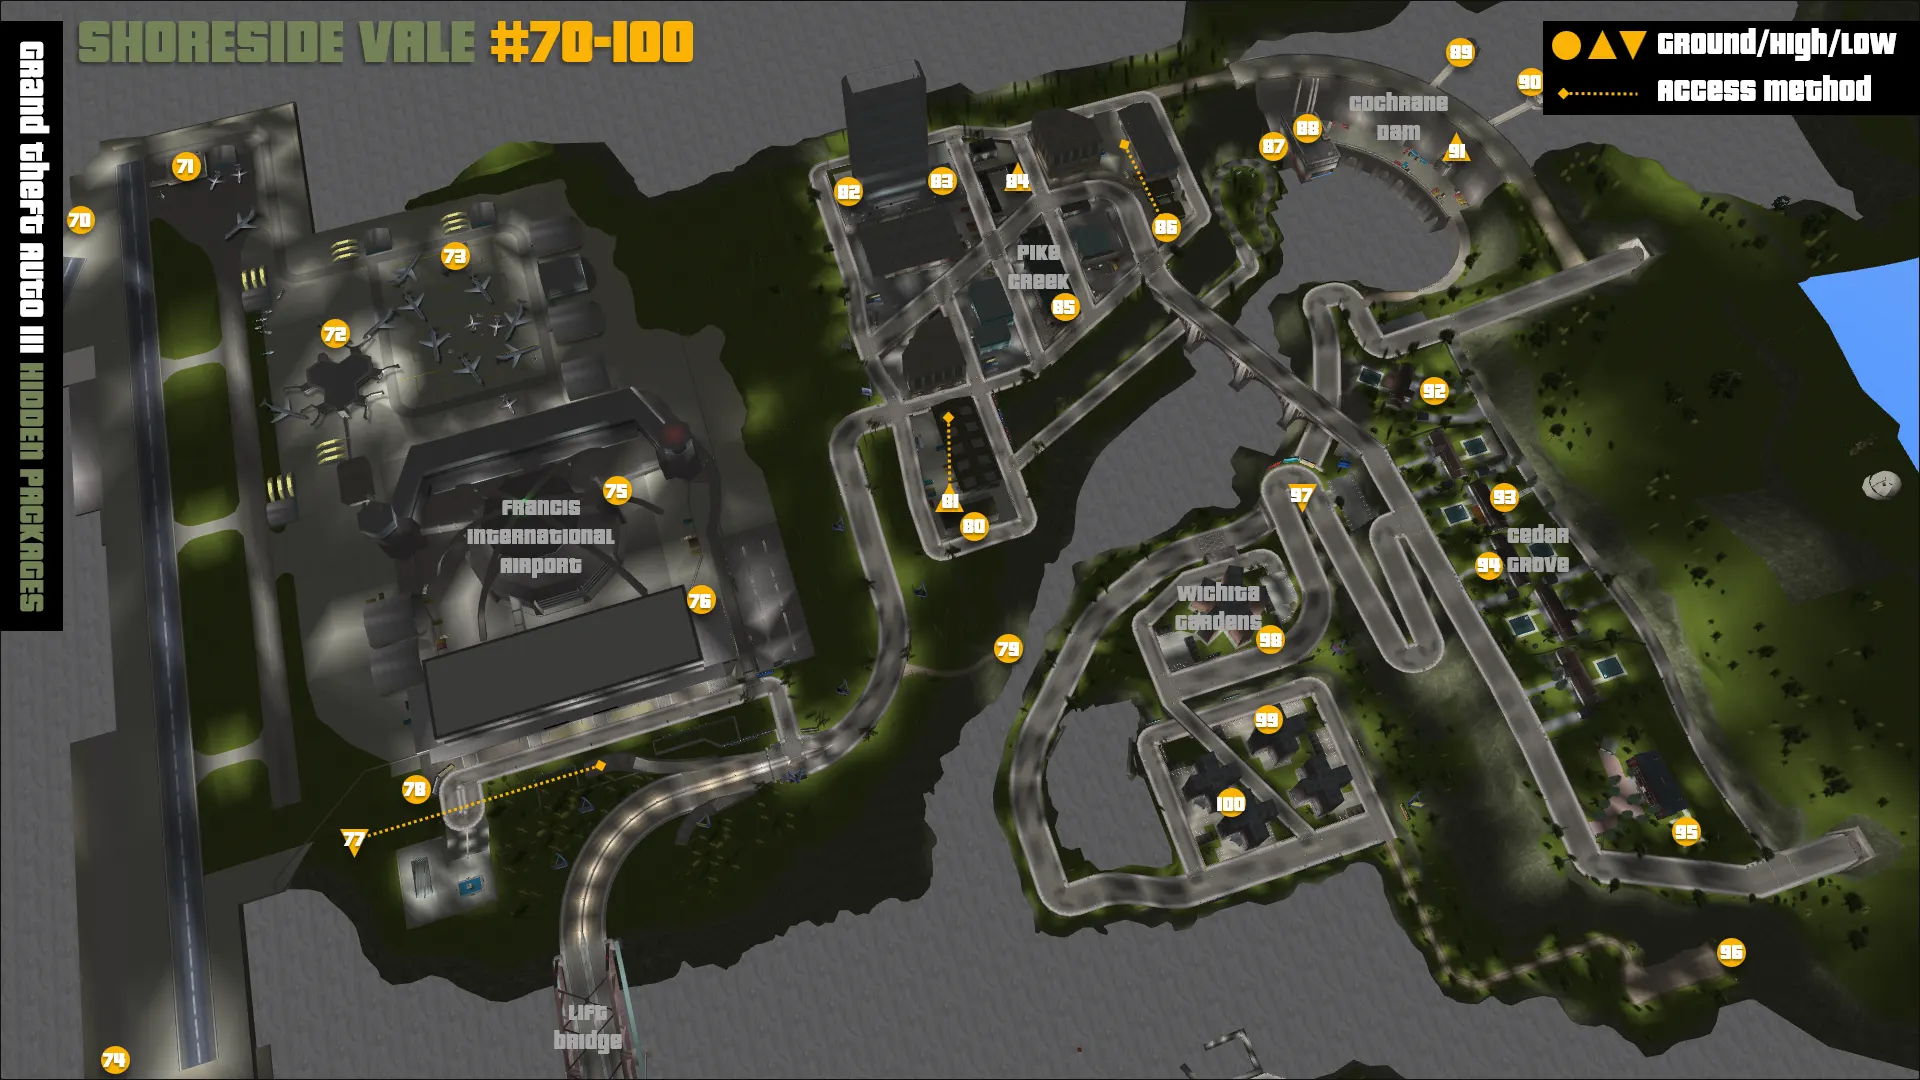 Grand Theft Auto III Shoreside Vale Hidden Packages map.